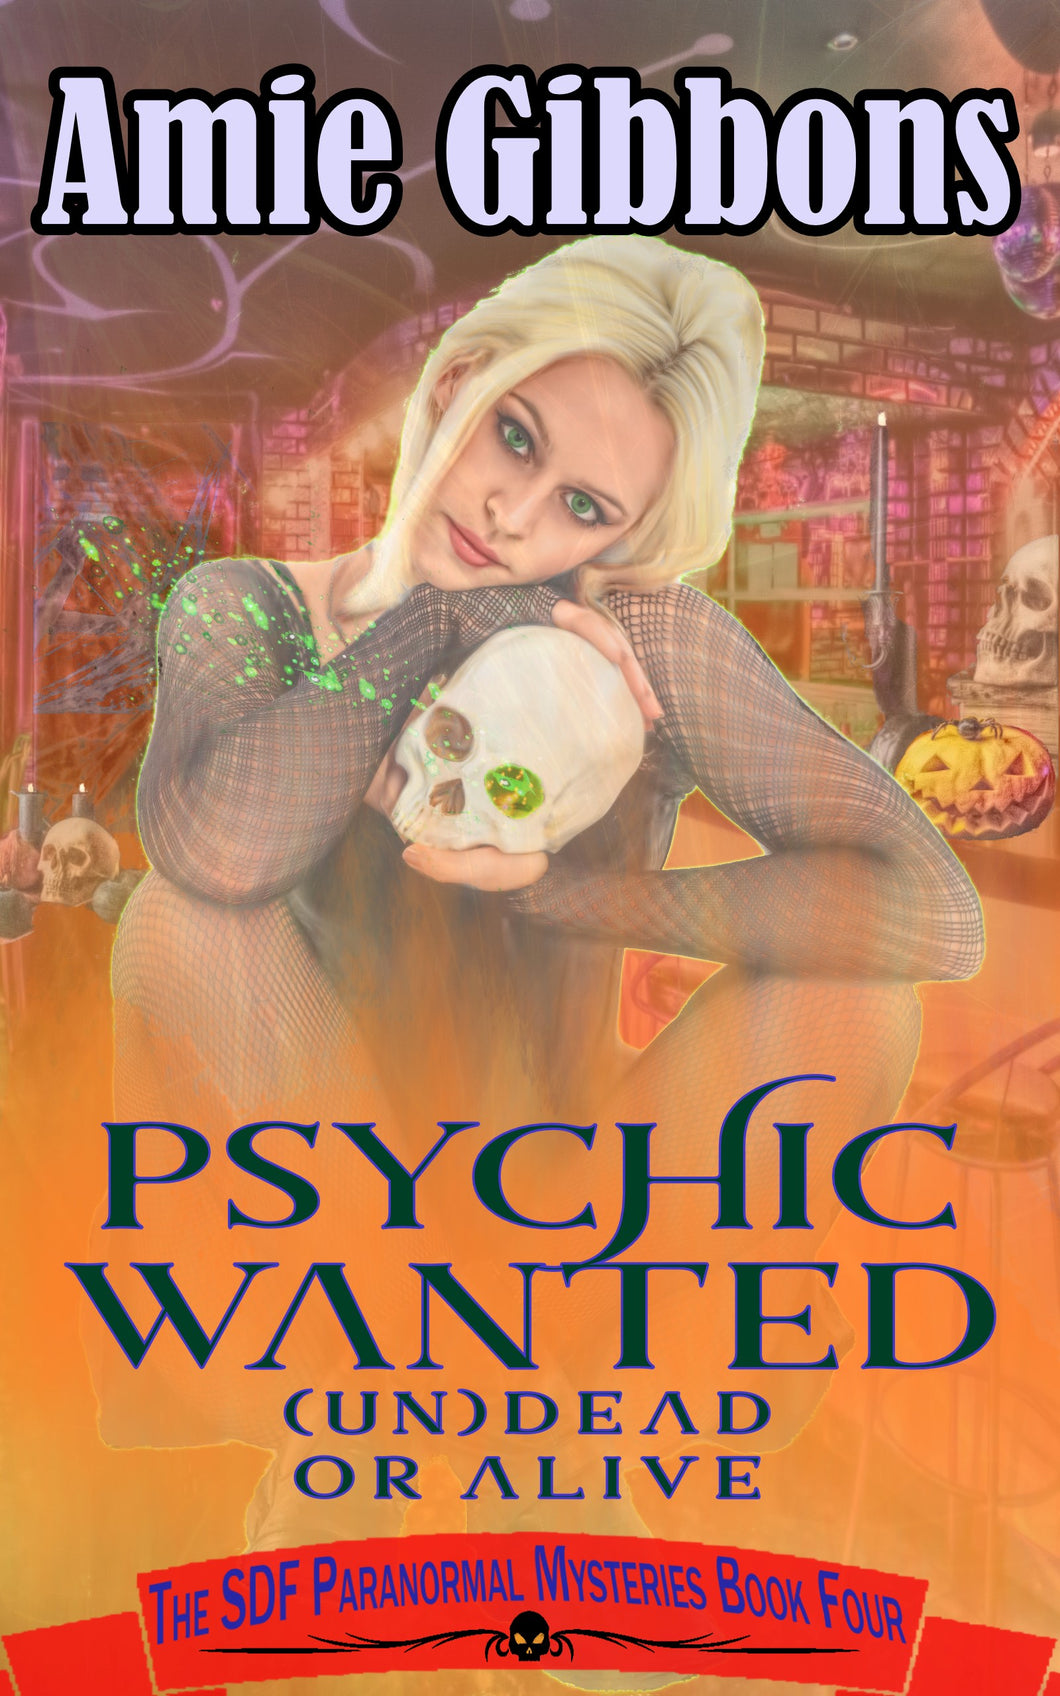 Psychic Wanted (Un)Dead or Alive  SDF 4